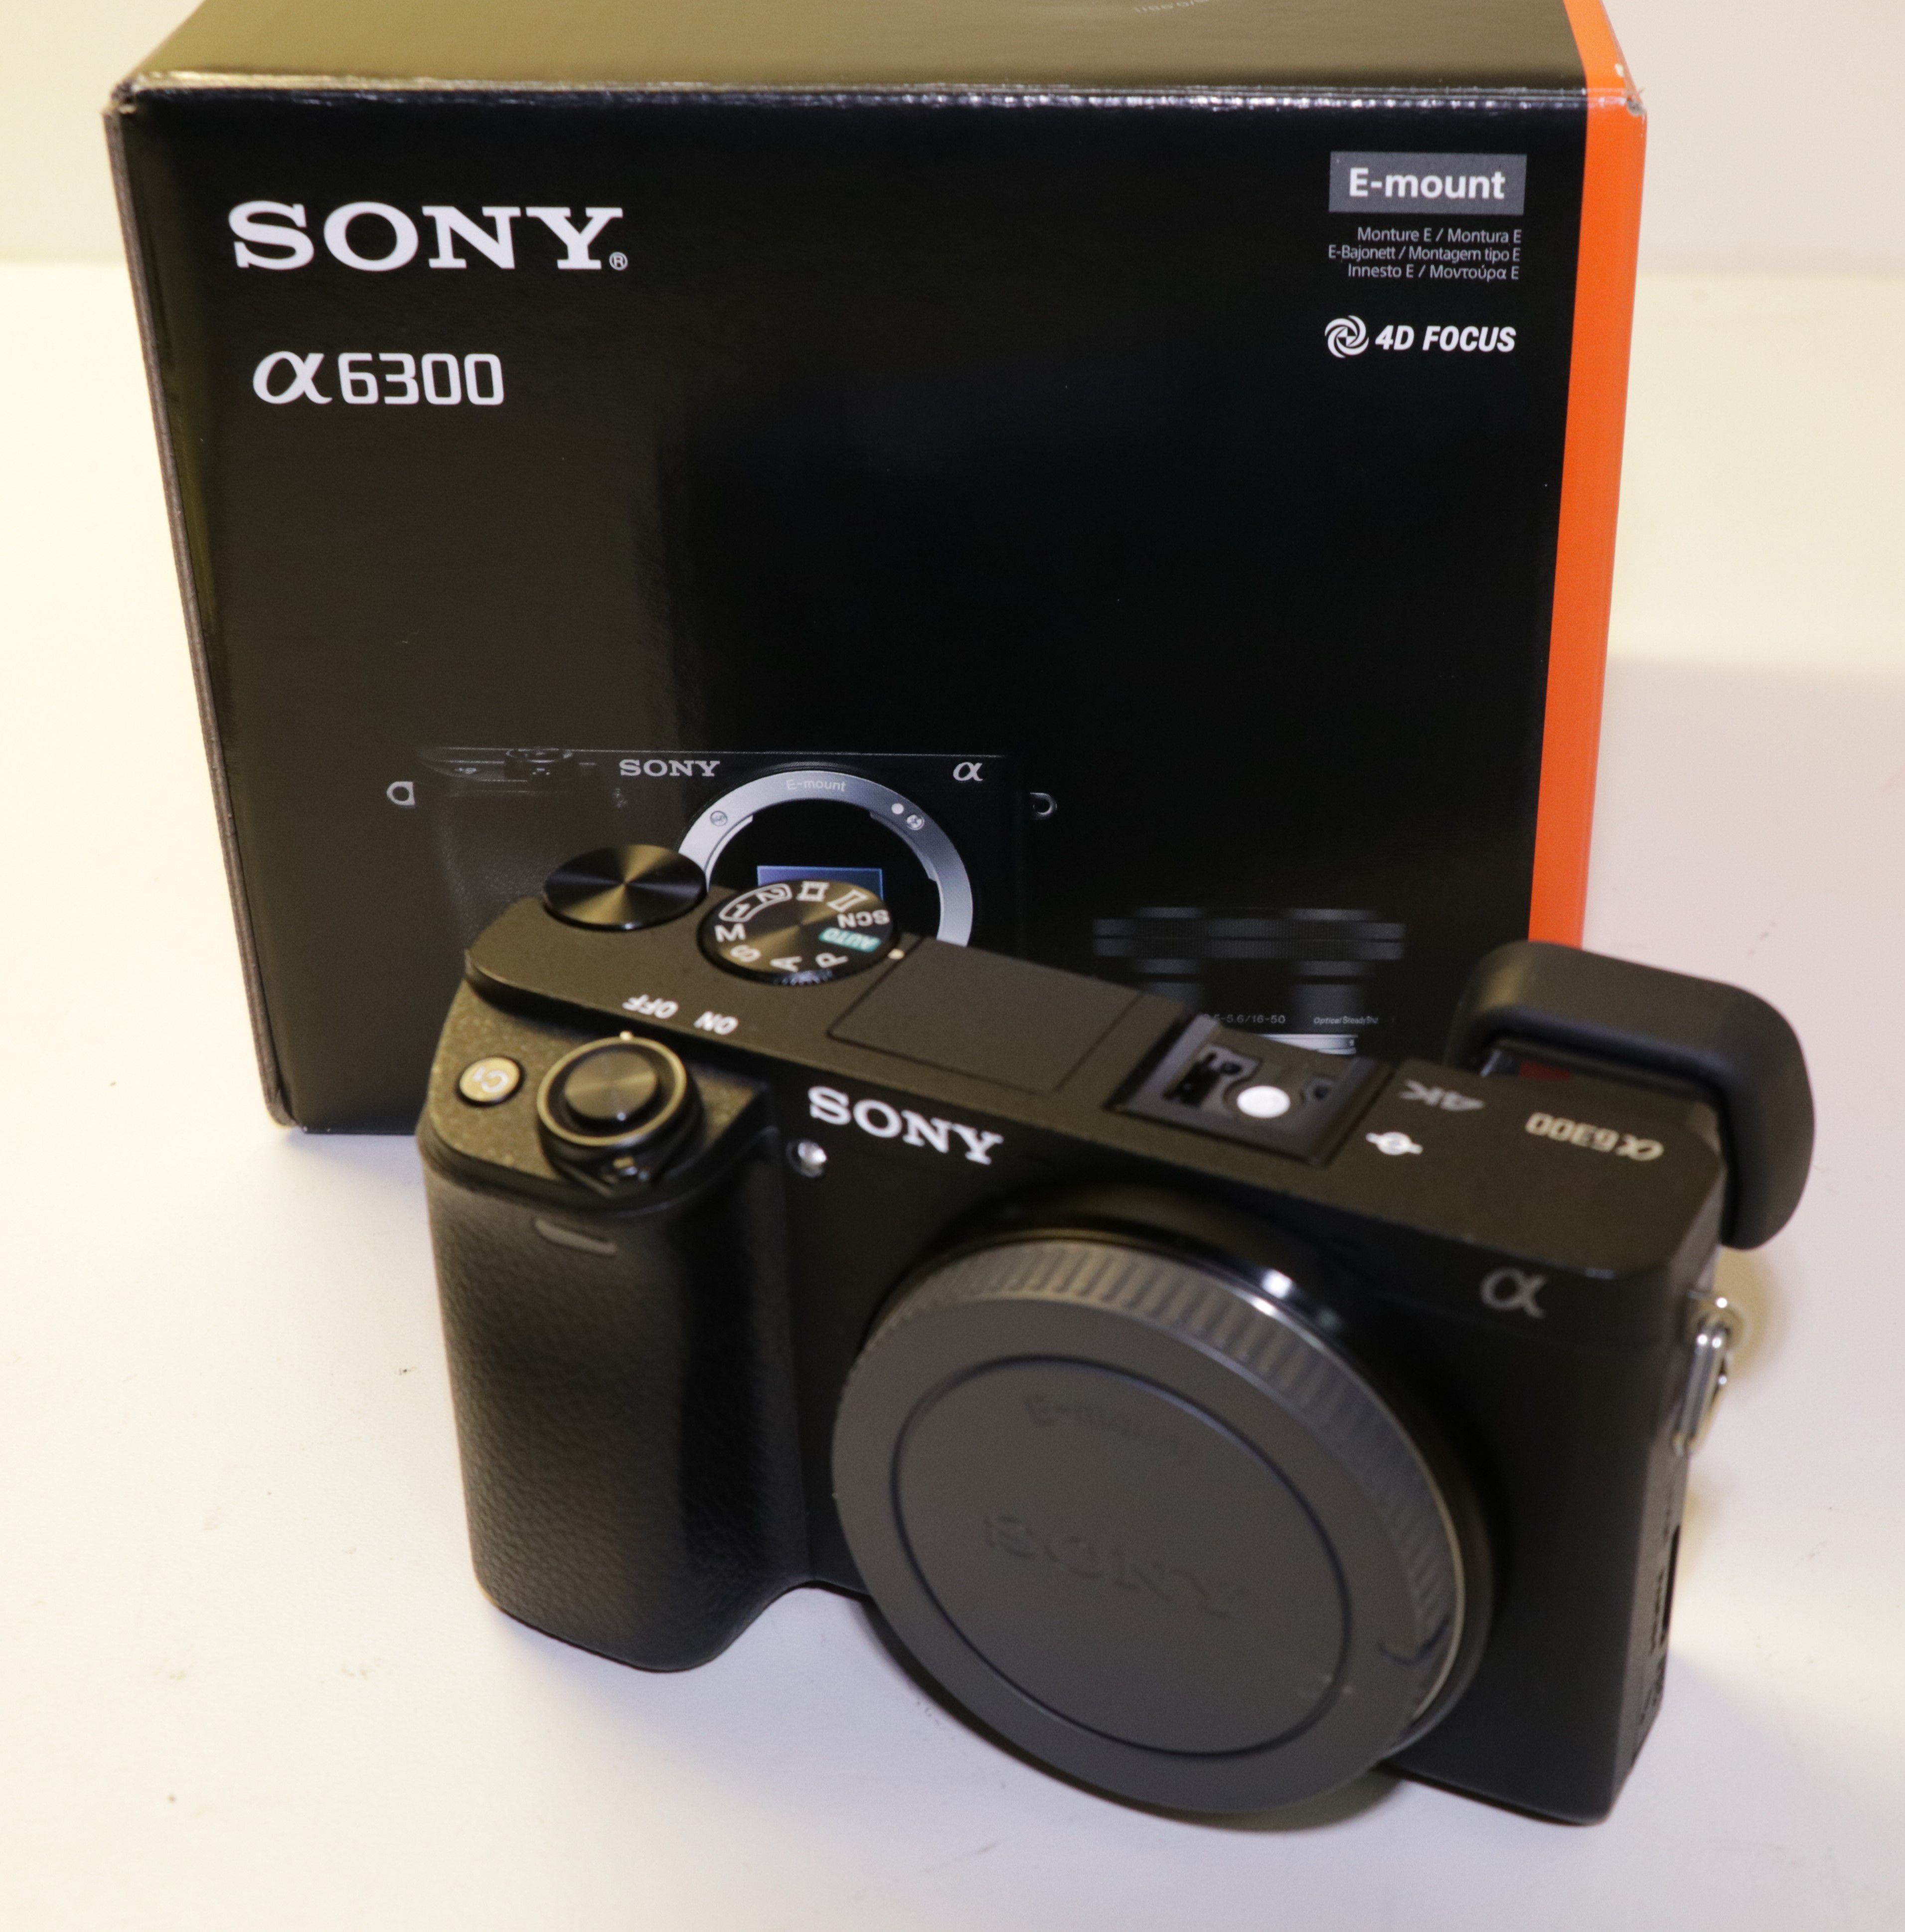 Sony a6300 Mirrorless Digital Camera with 4K Video - ILCE 6300 Body